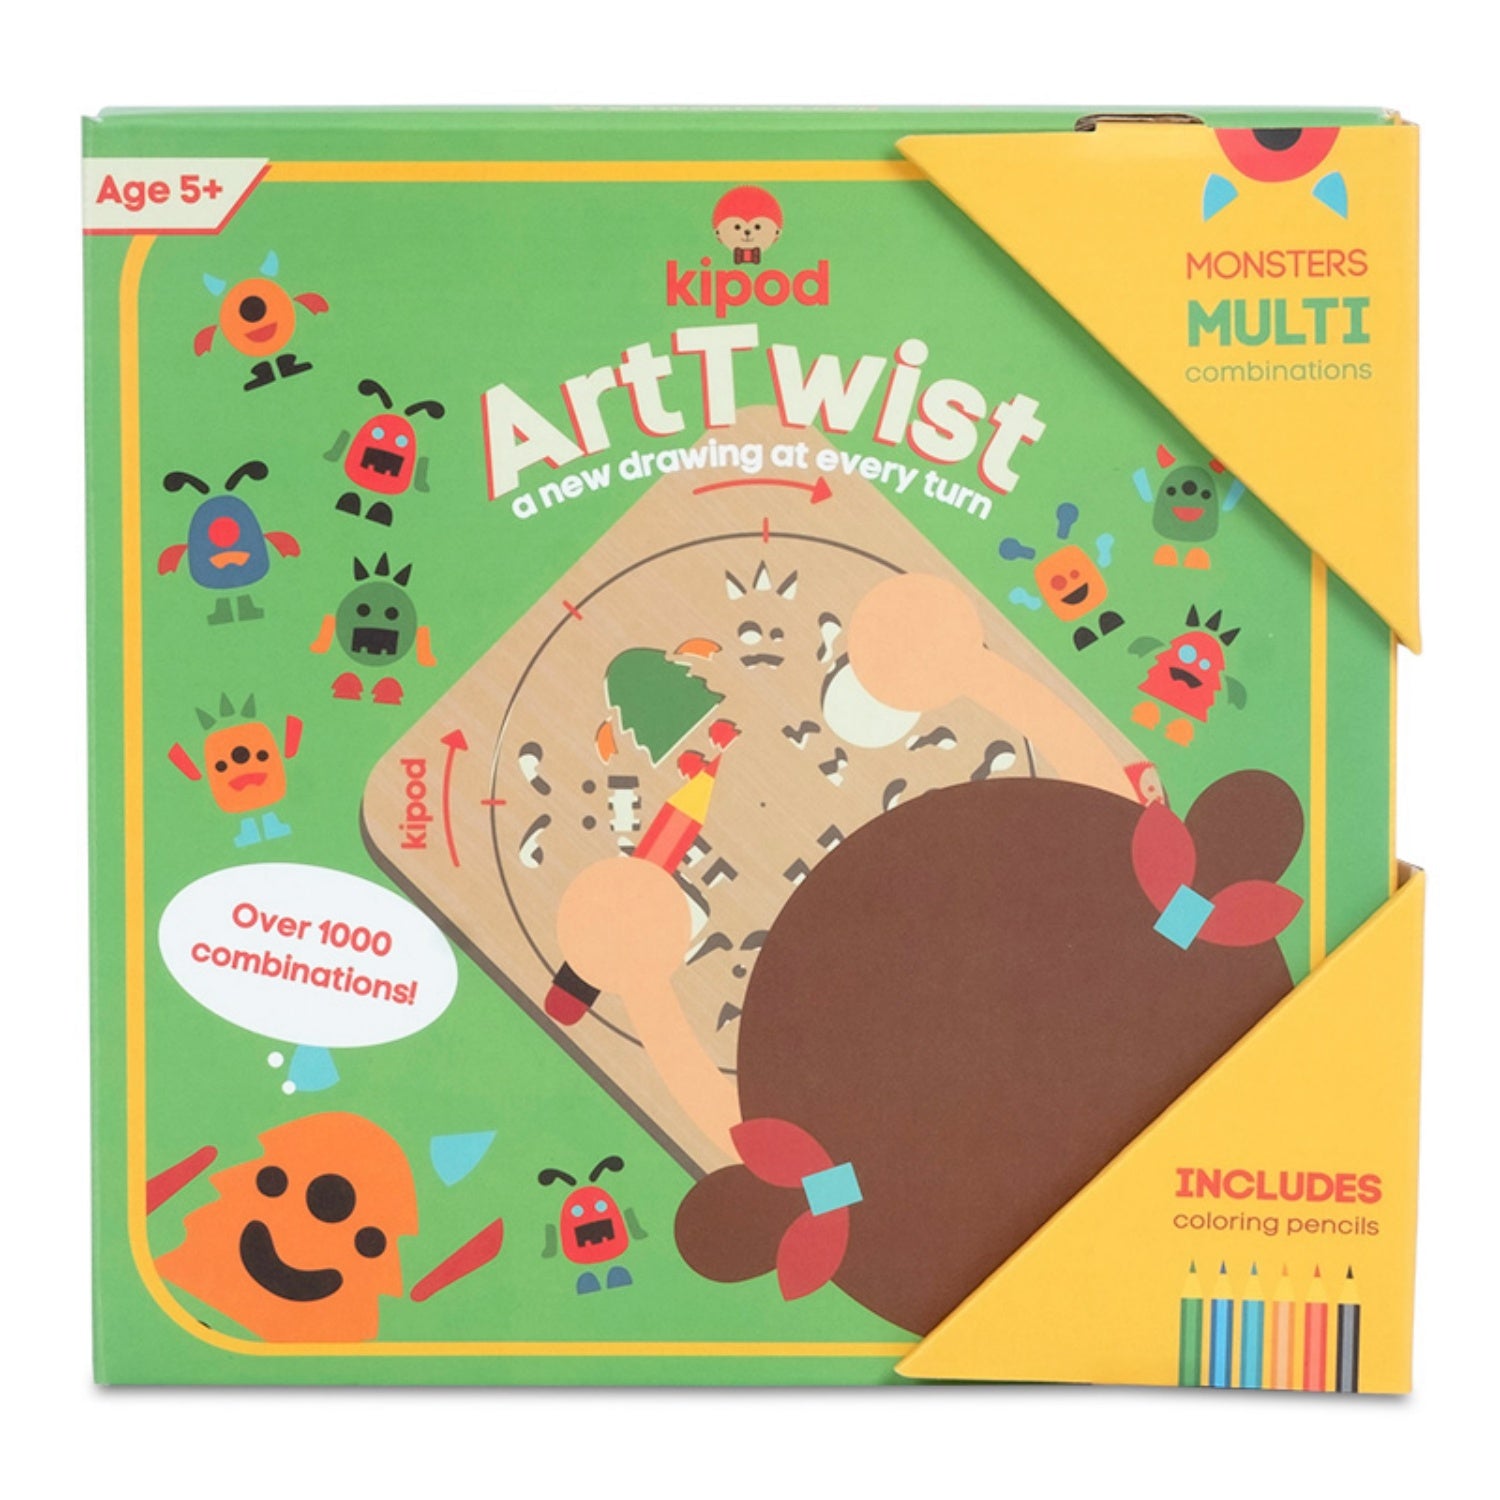 Monsters - Rotating Wooden Drawing Stencil Kit for Children | Kipod Toys | Wooden Arts & Crafts Kit | Educational Wooden Toy | Packaging Front | BeoVERDE.ie